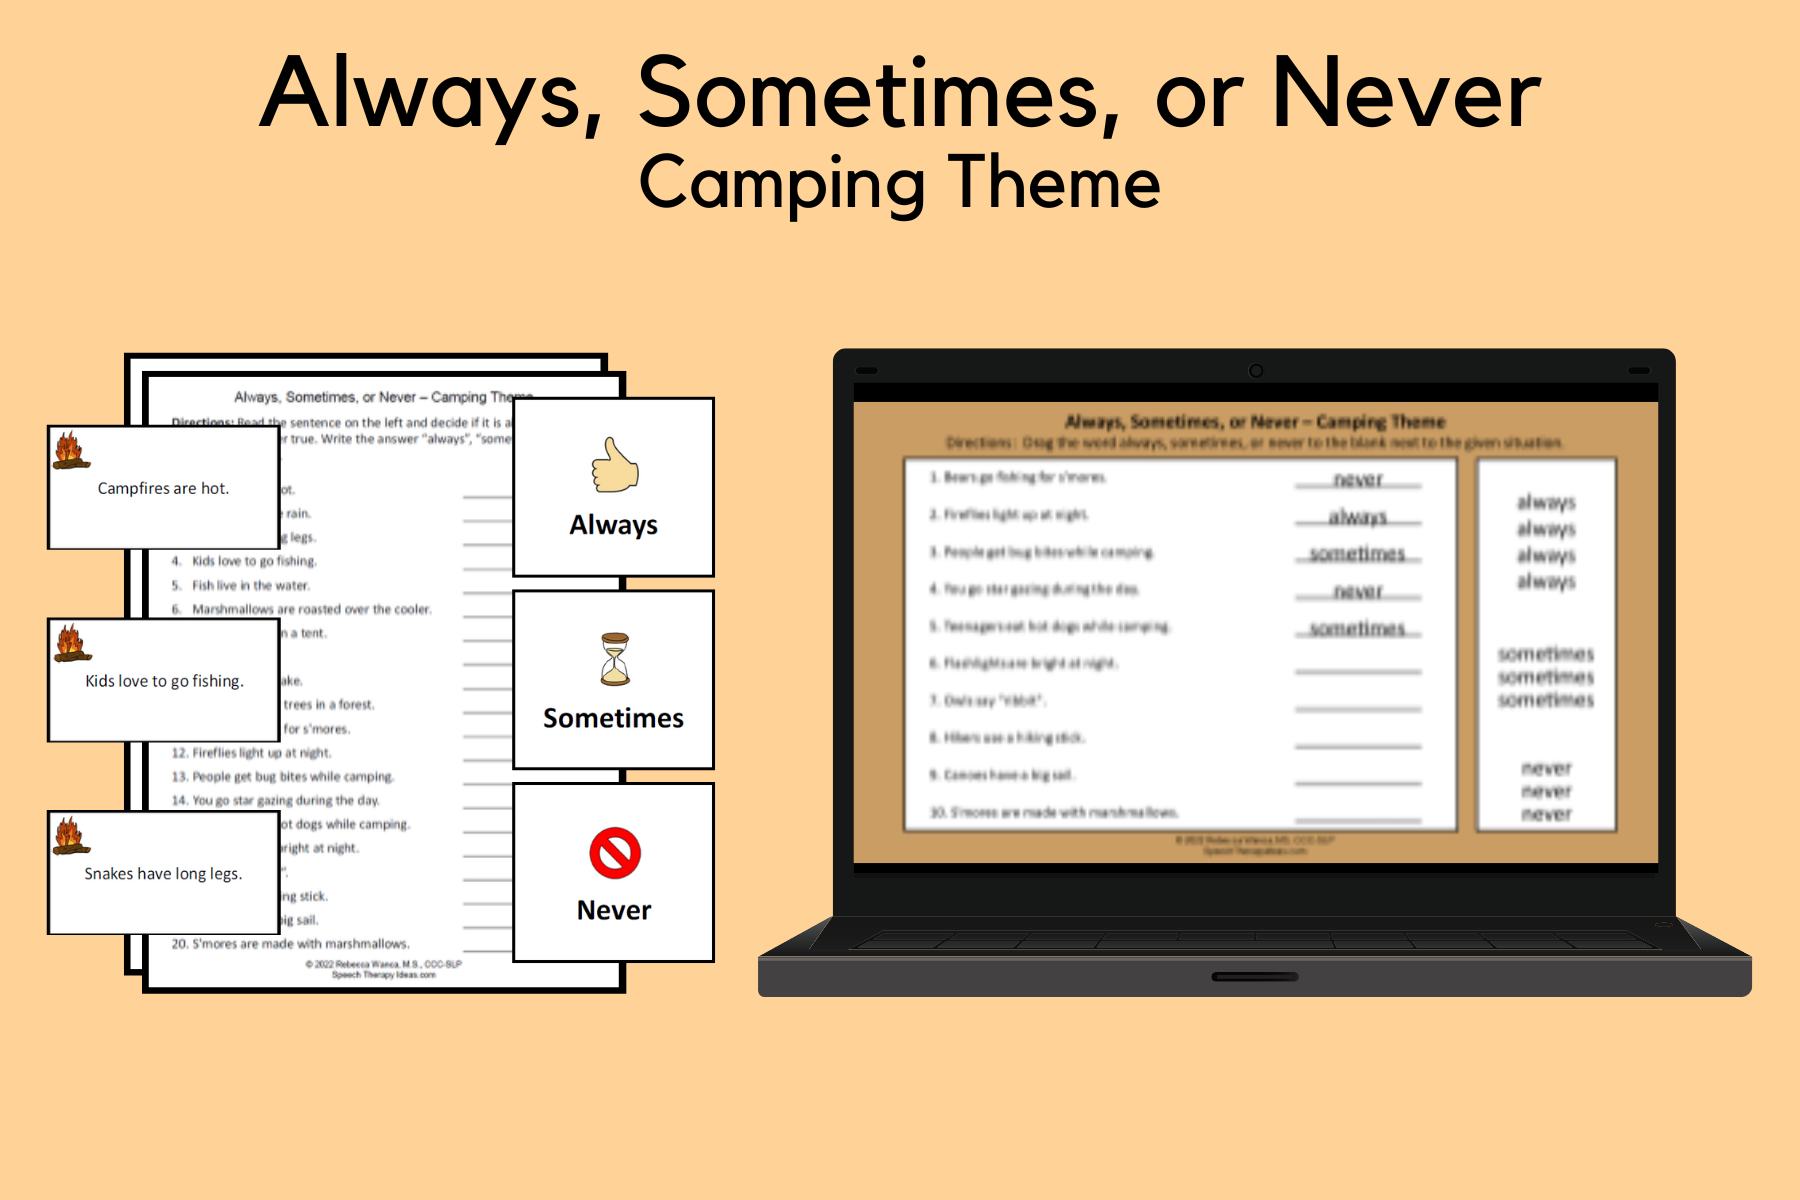 Always, Sometimes, or Never – Camping Theme